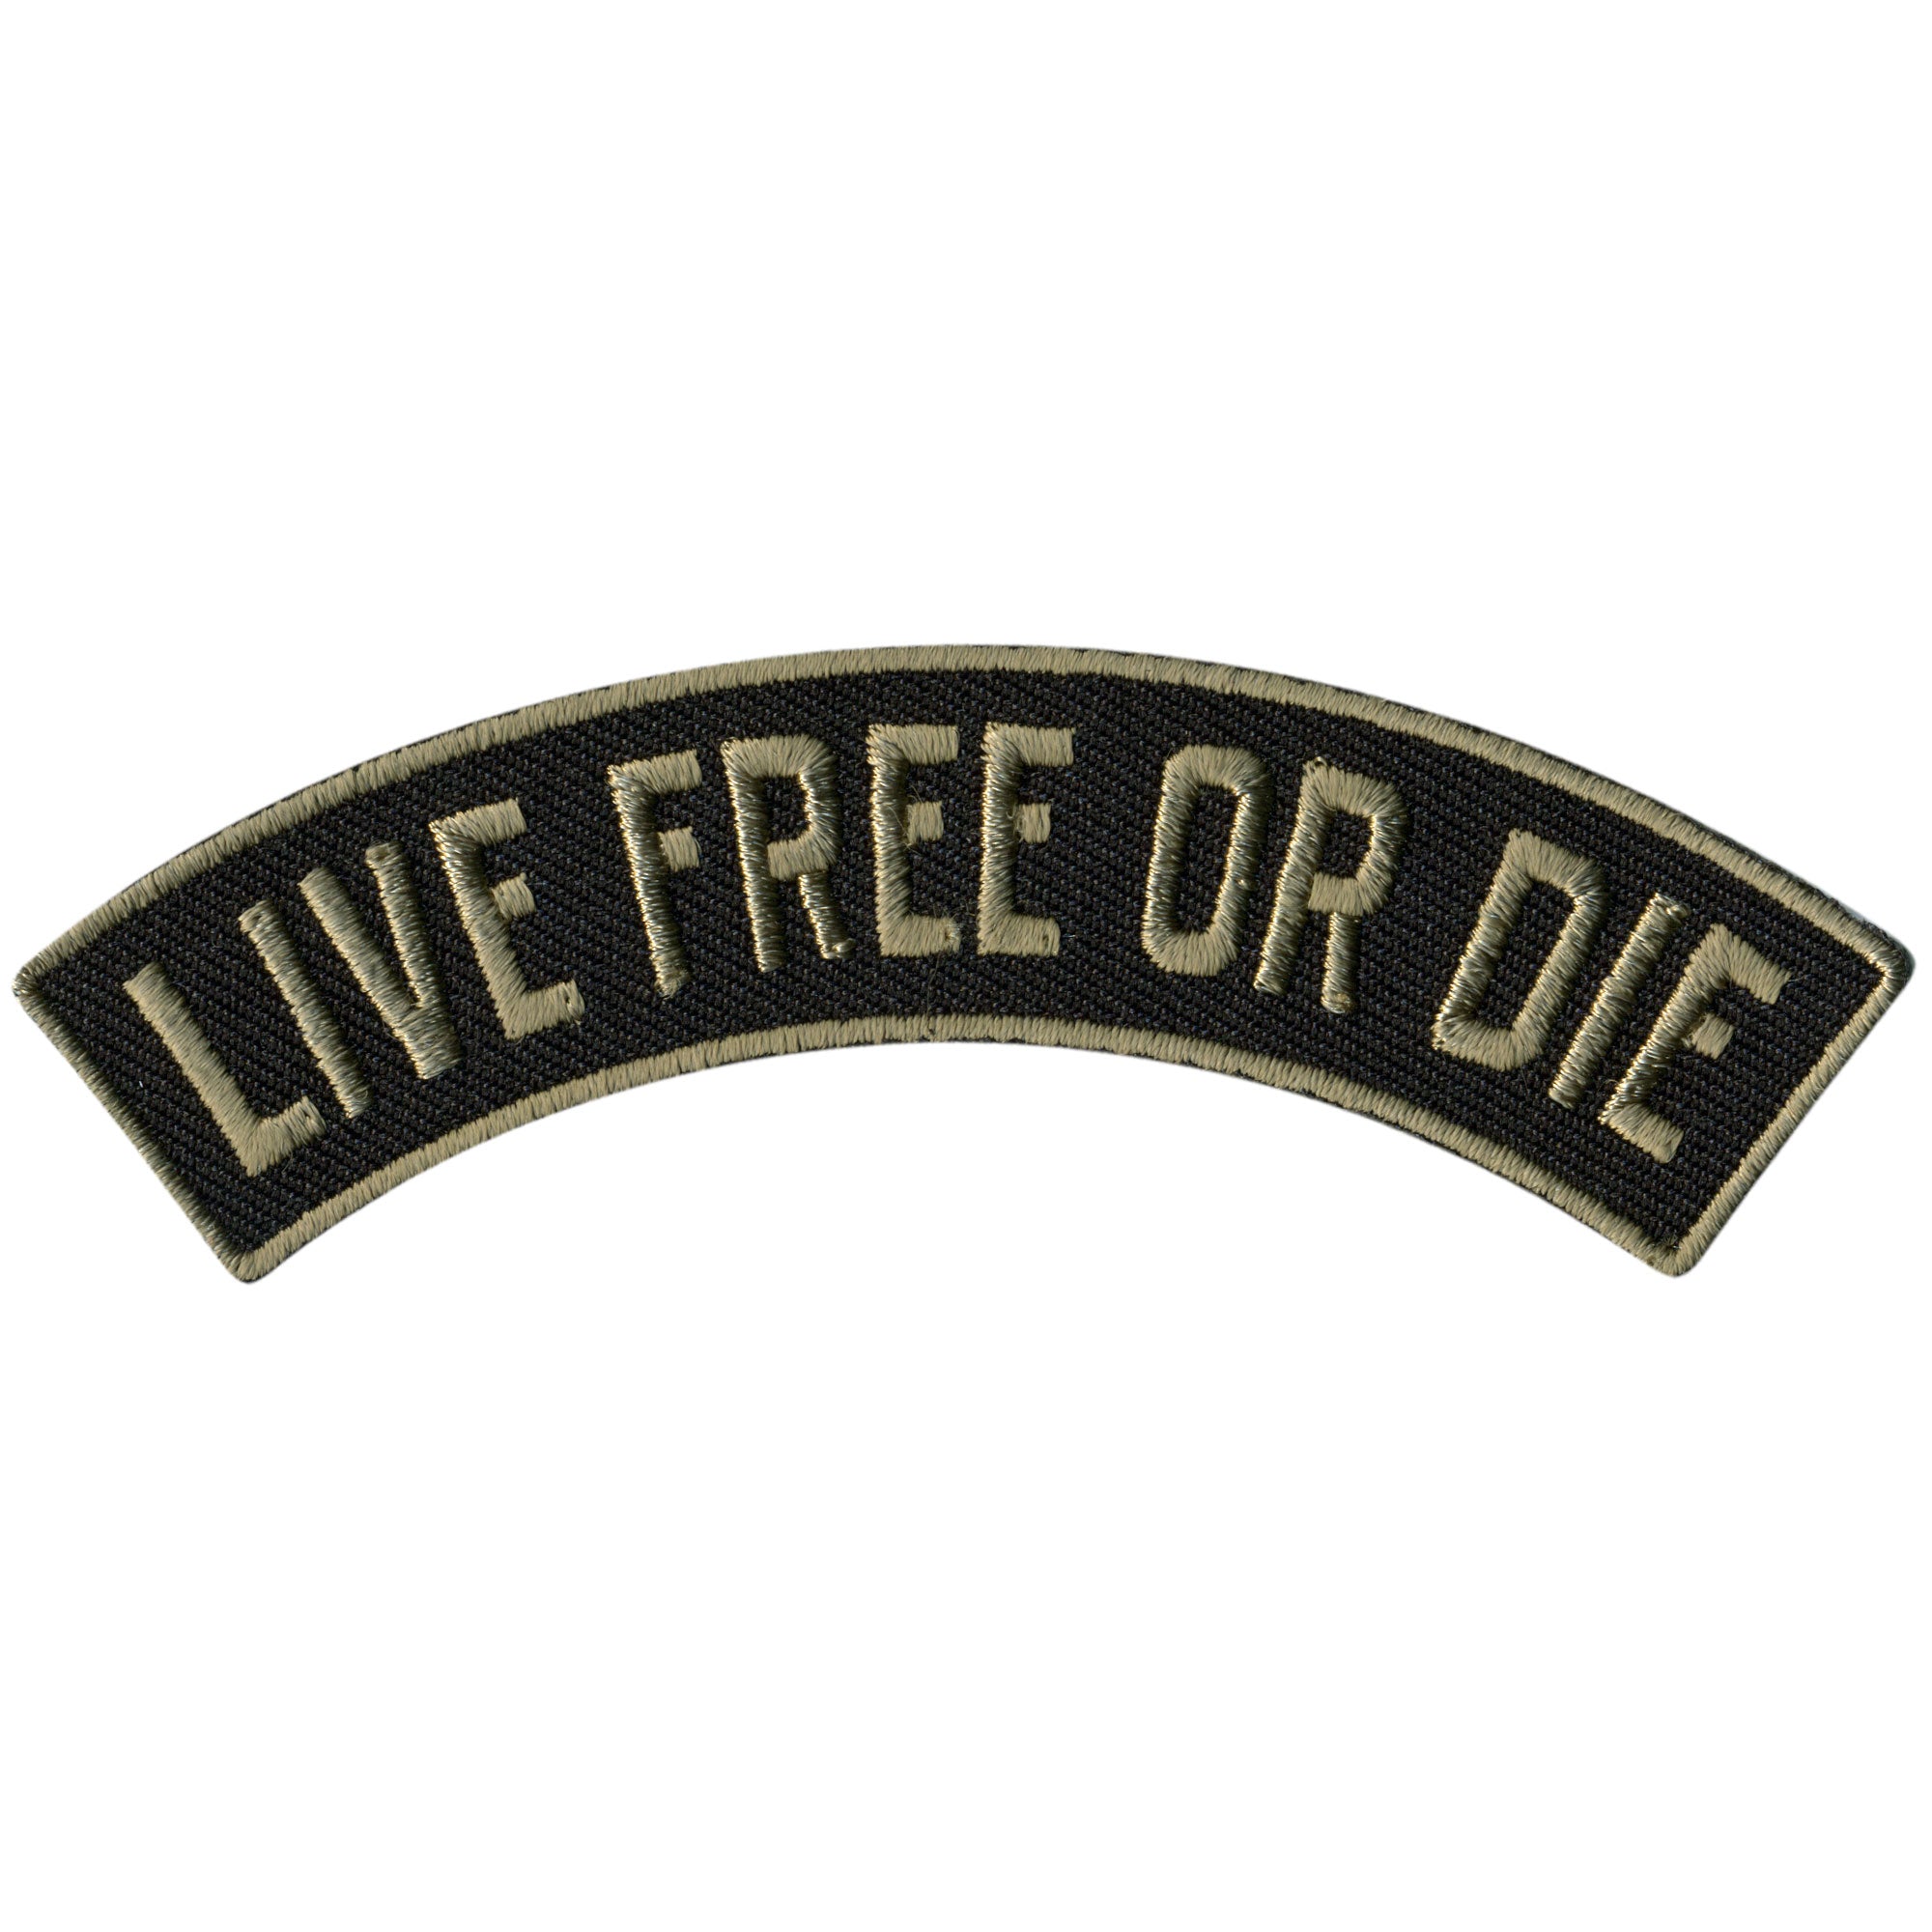 Hot Leathers Live Free Or Die 4” X 1” Top Rocker Patch